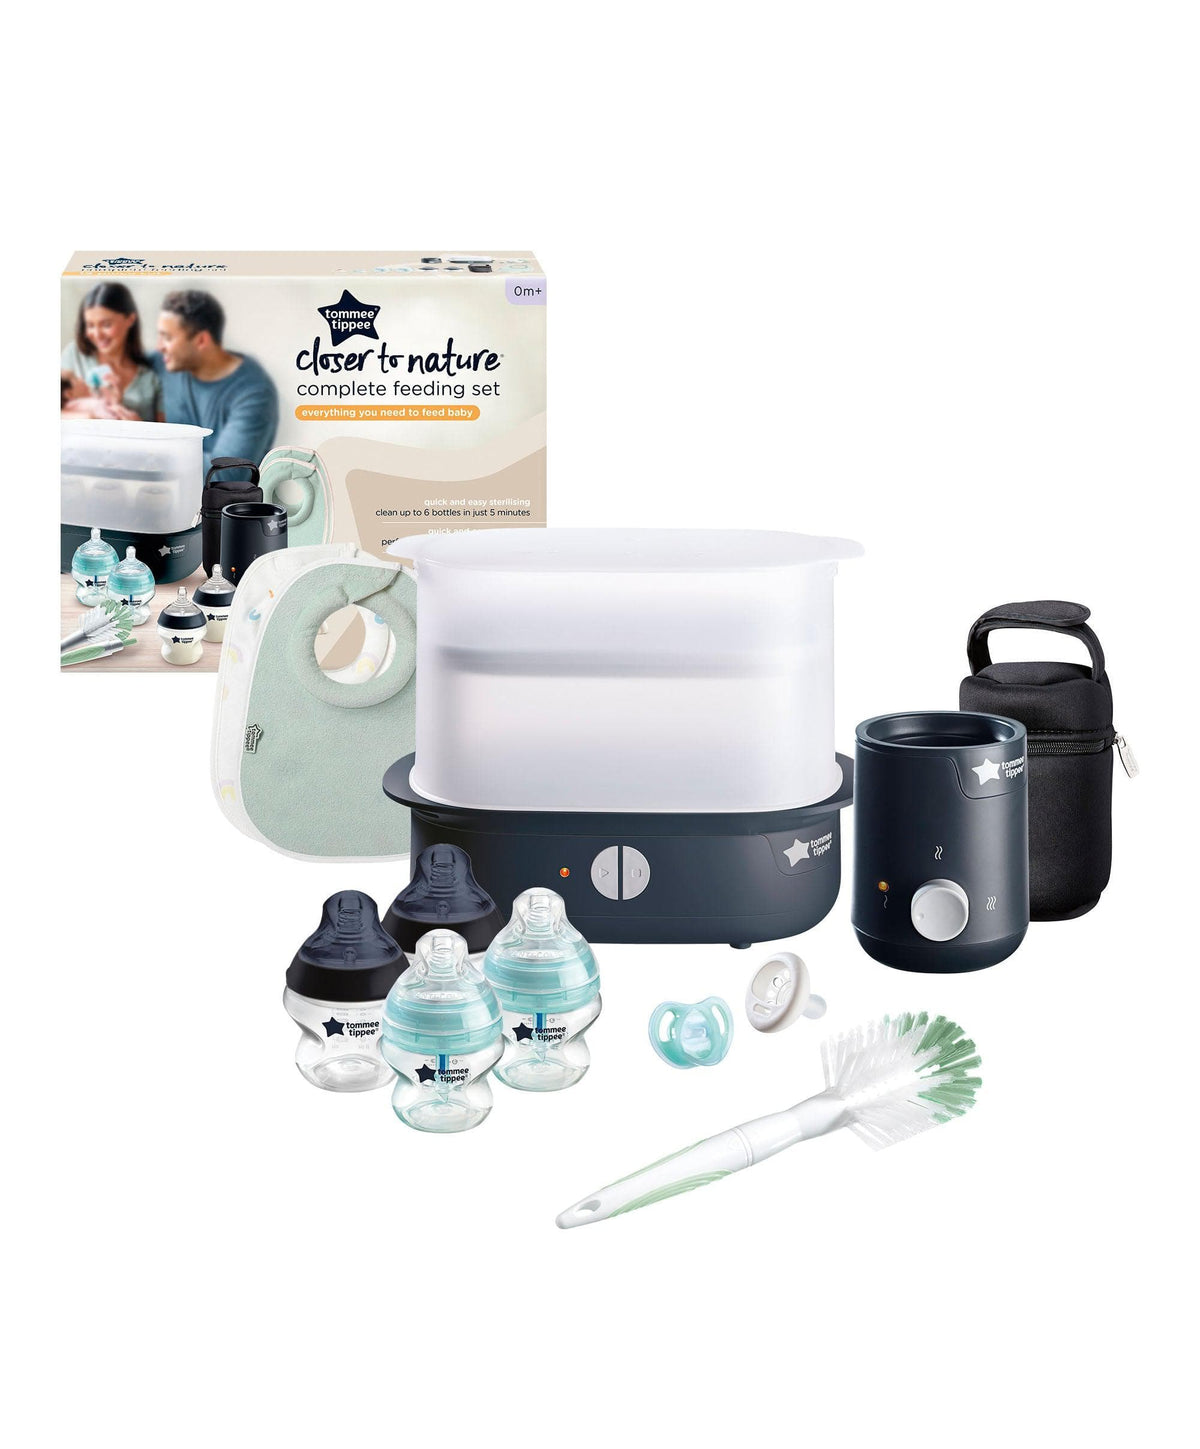 Tommee Tippee Made for Me Single Wearable Breast Pump – Mamas & Papas UK